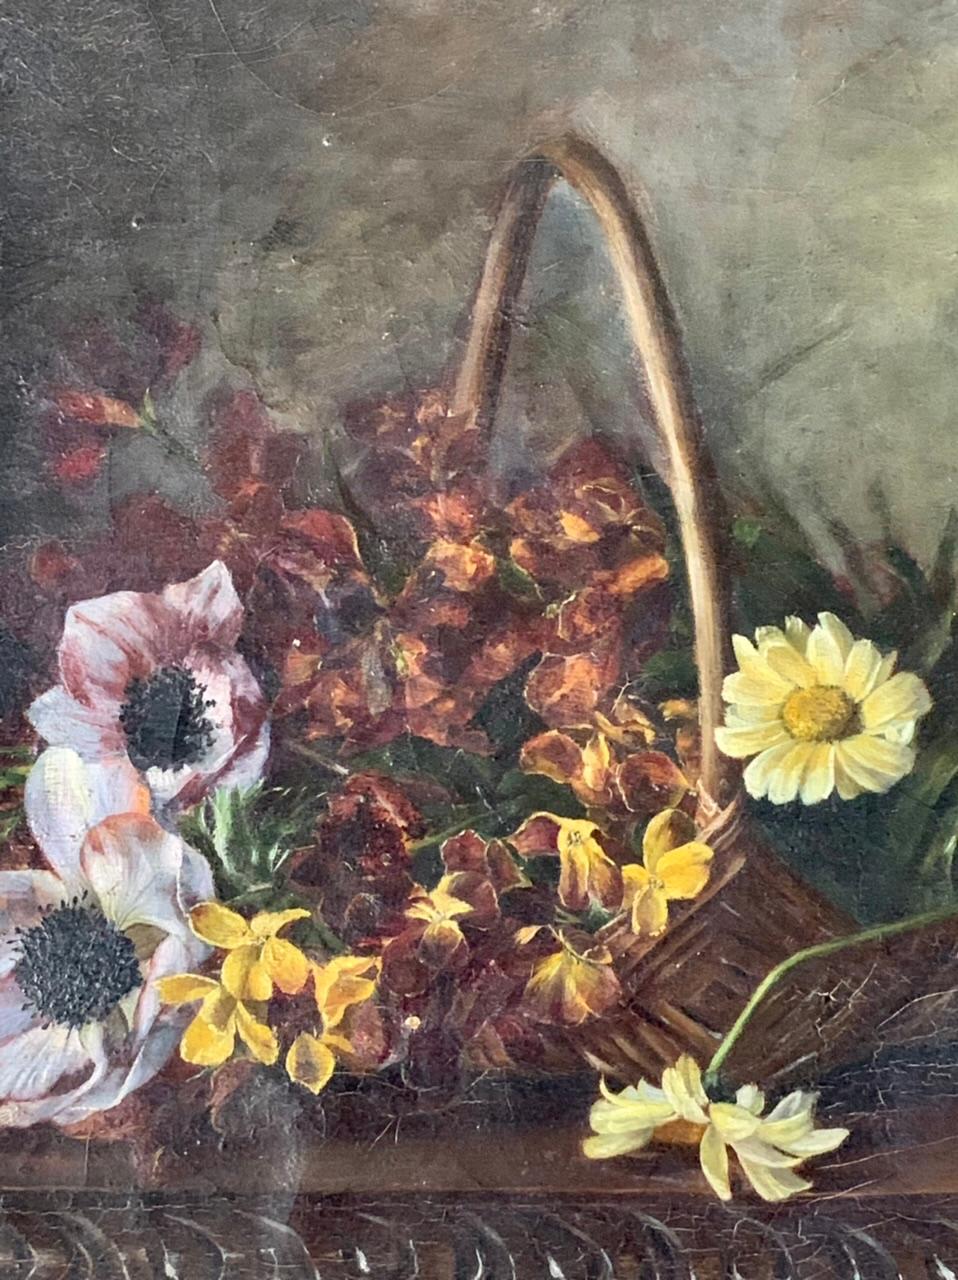 Very beautiful oil on canvas of the XIX th century. In this wicker basket, we find irises, daisies, anemones, wallflowers… Still life painting from the 19th century. 
Still life realized by an artist of the French school of the XIXth with a very